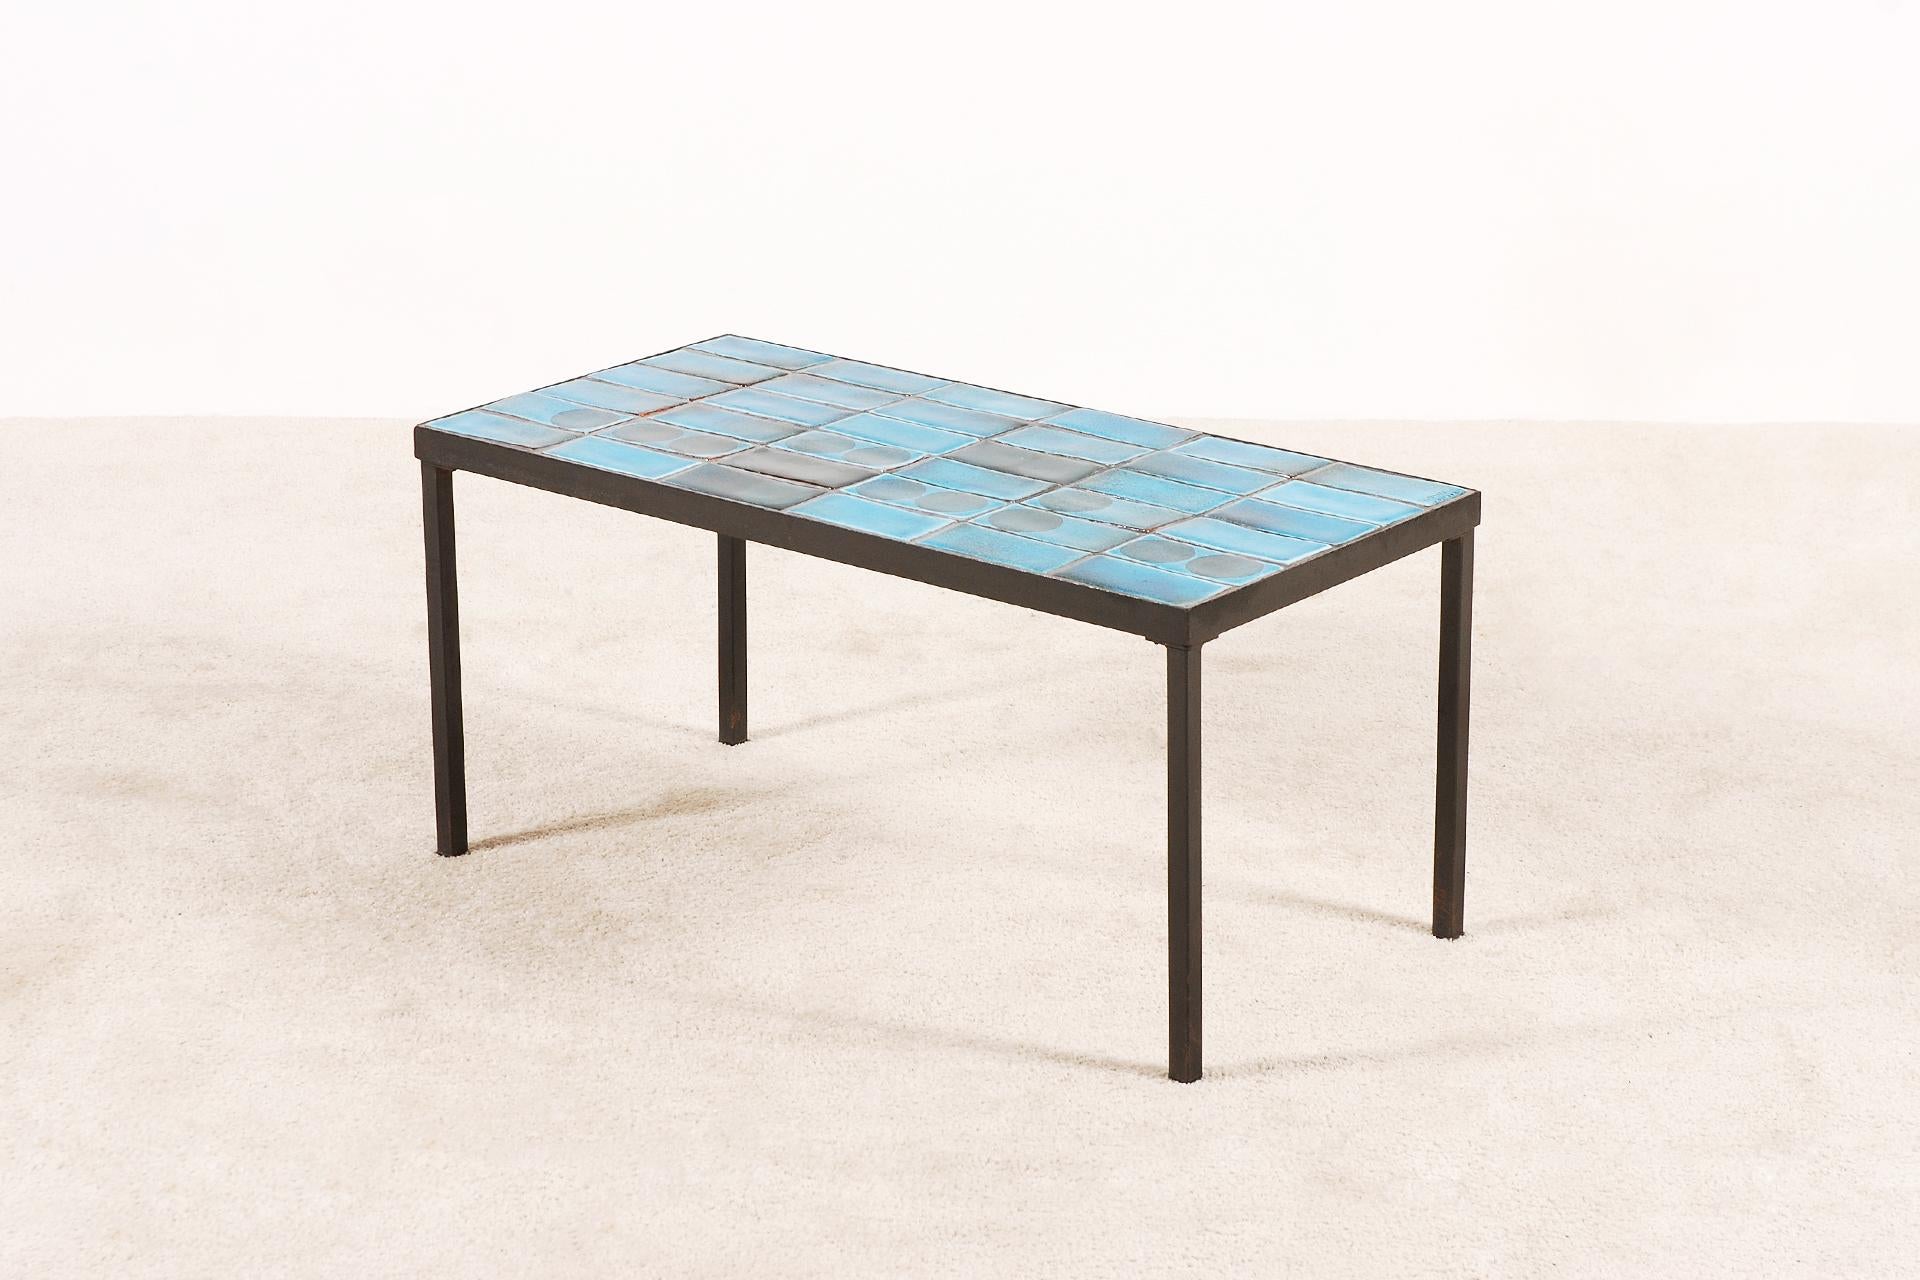 Coffee table designed by the French ceramists Almone (Alain + Simone), circa 1960.
The top is made of very nice blue ceramic tiles and the frame is in black lacquered metal.

The table is signed by Almone + Vallauris in a corner.